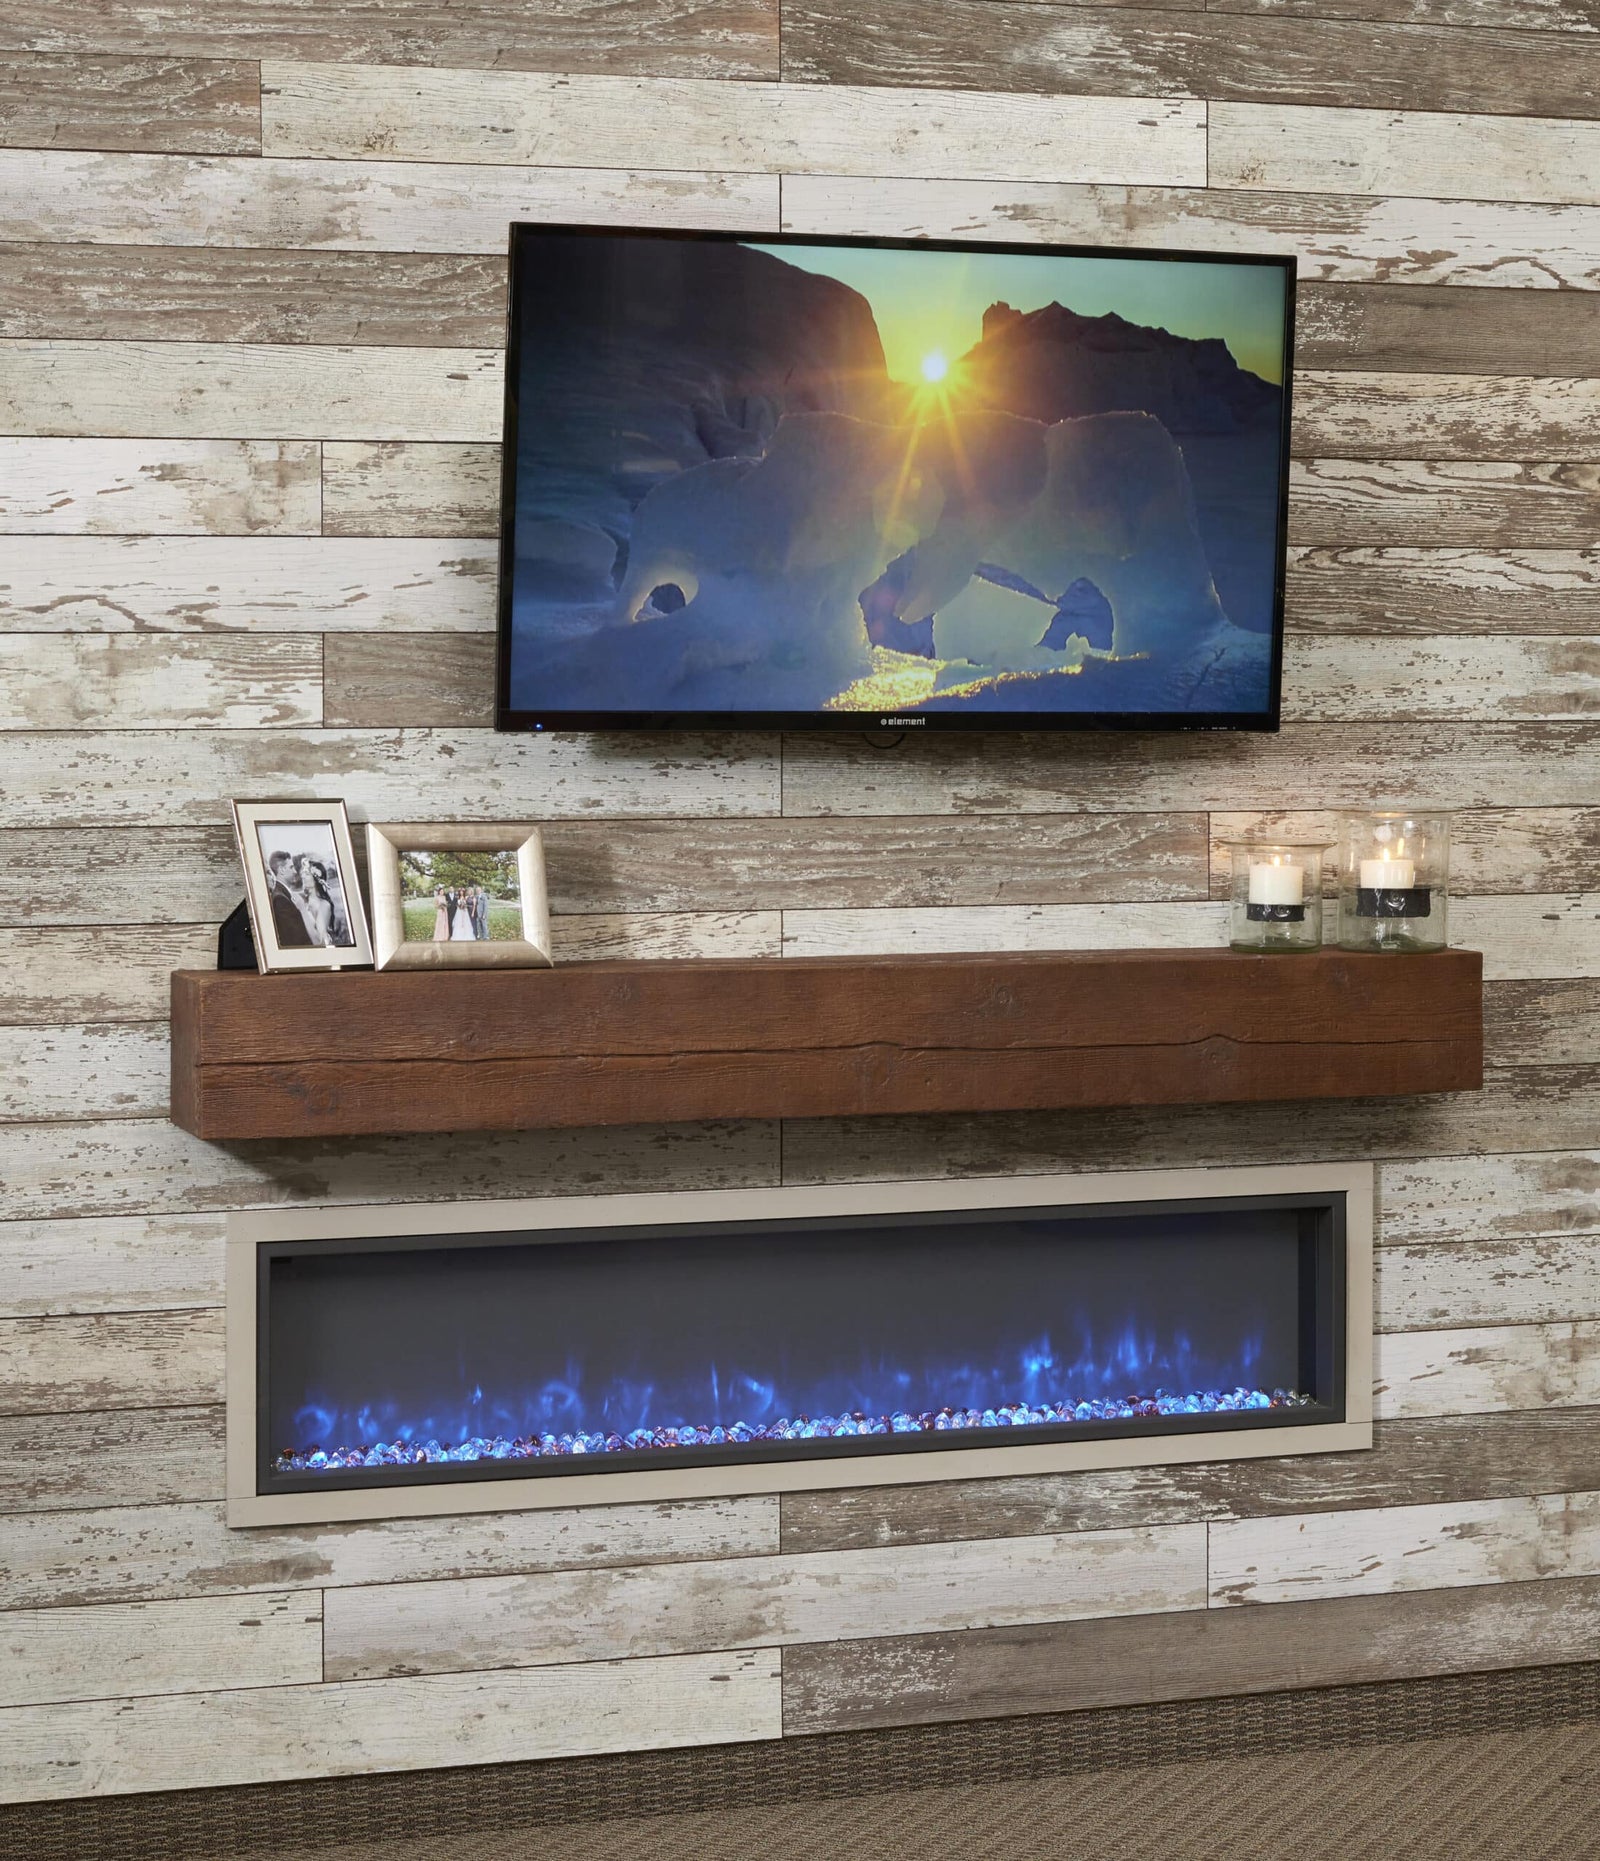 The Benefits of Non-Combustible Fireplace Mantels